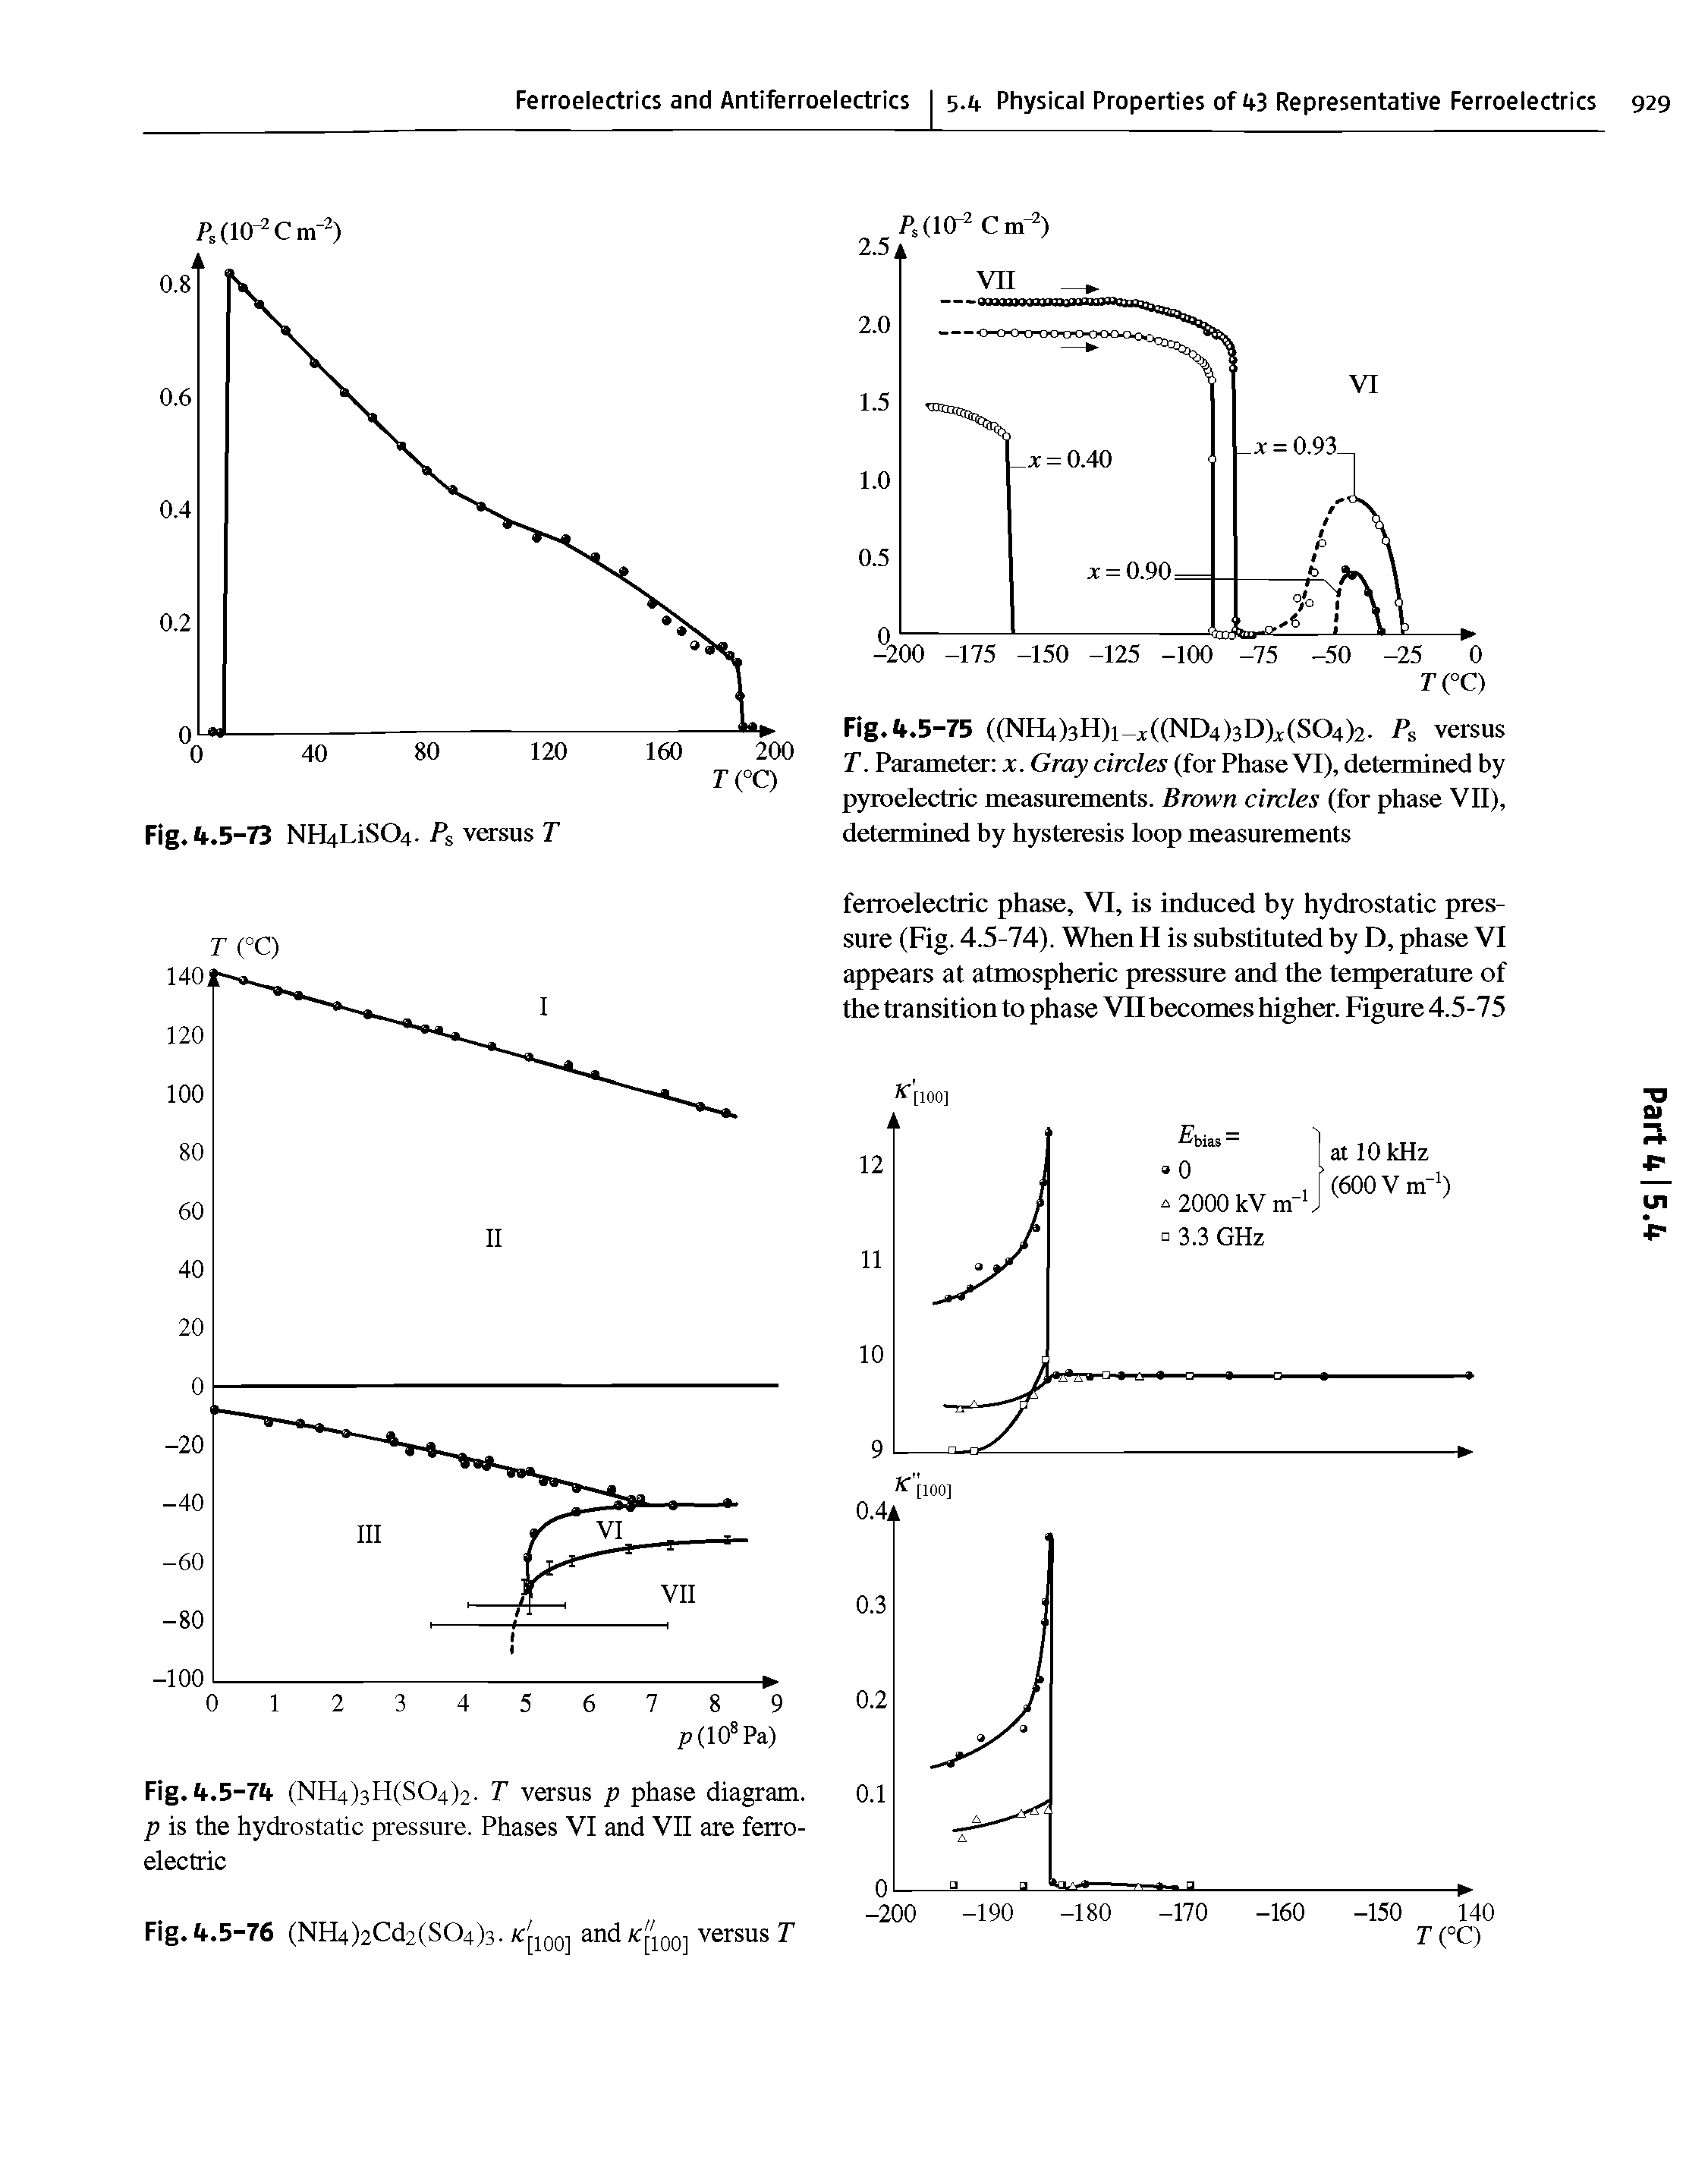 Fig. A.5-7A (NH4)3H(S04)2. T versus p phase diagram. p is the hydrostatic pressure. Phases VI and VII are ferroelectric...